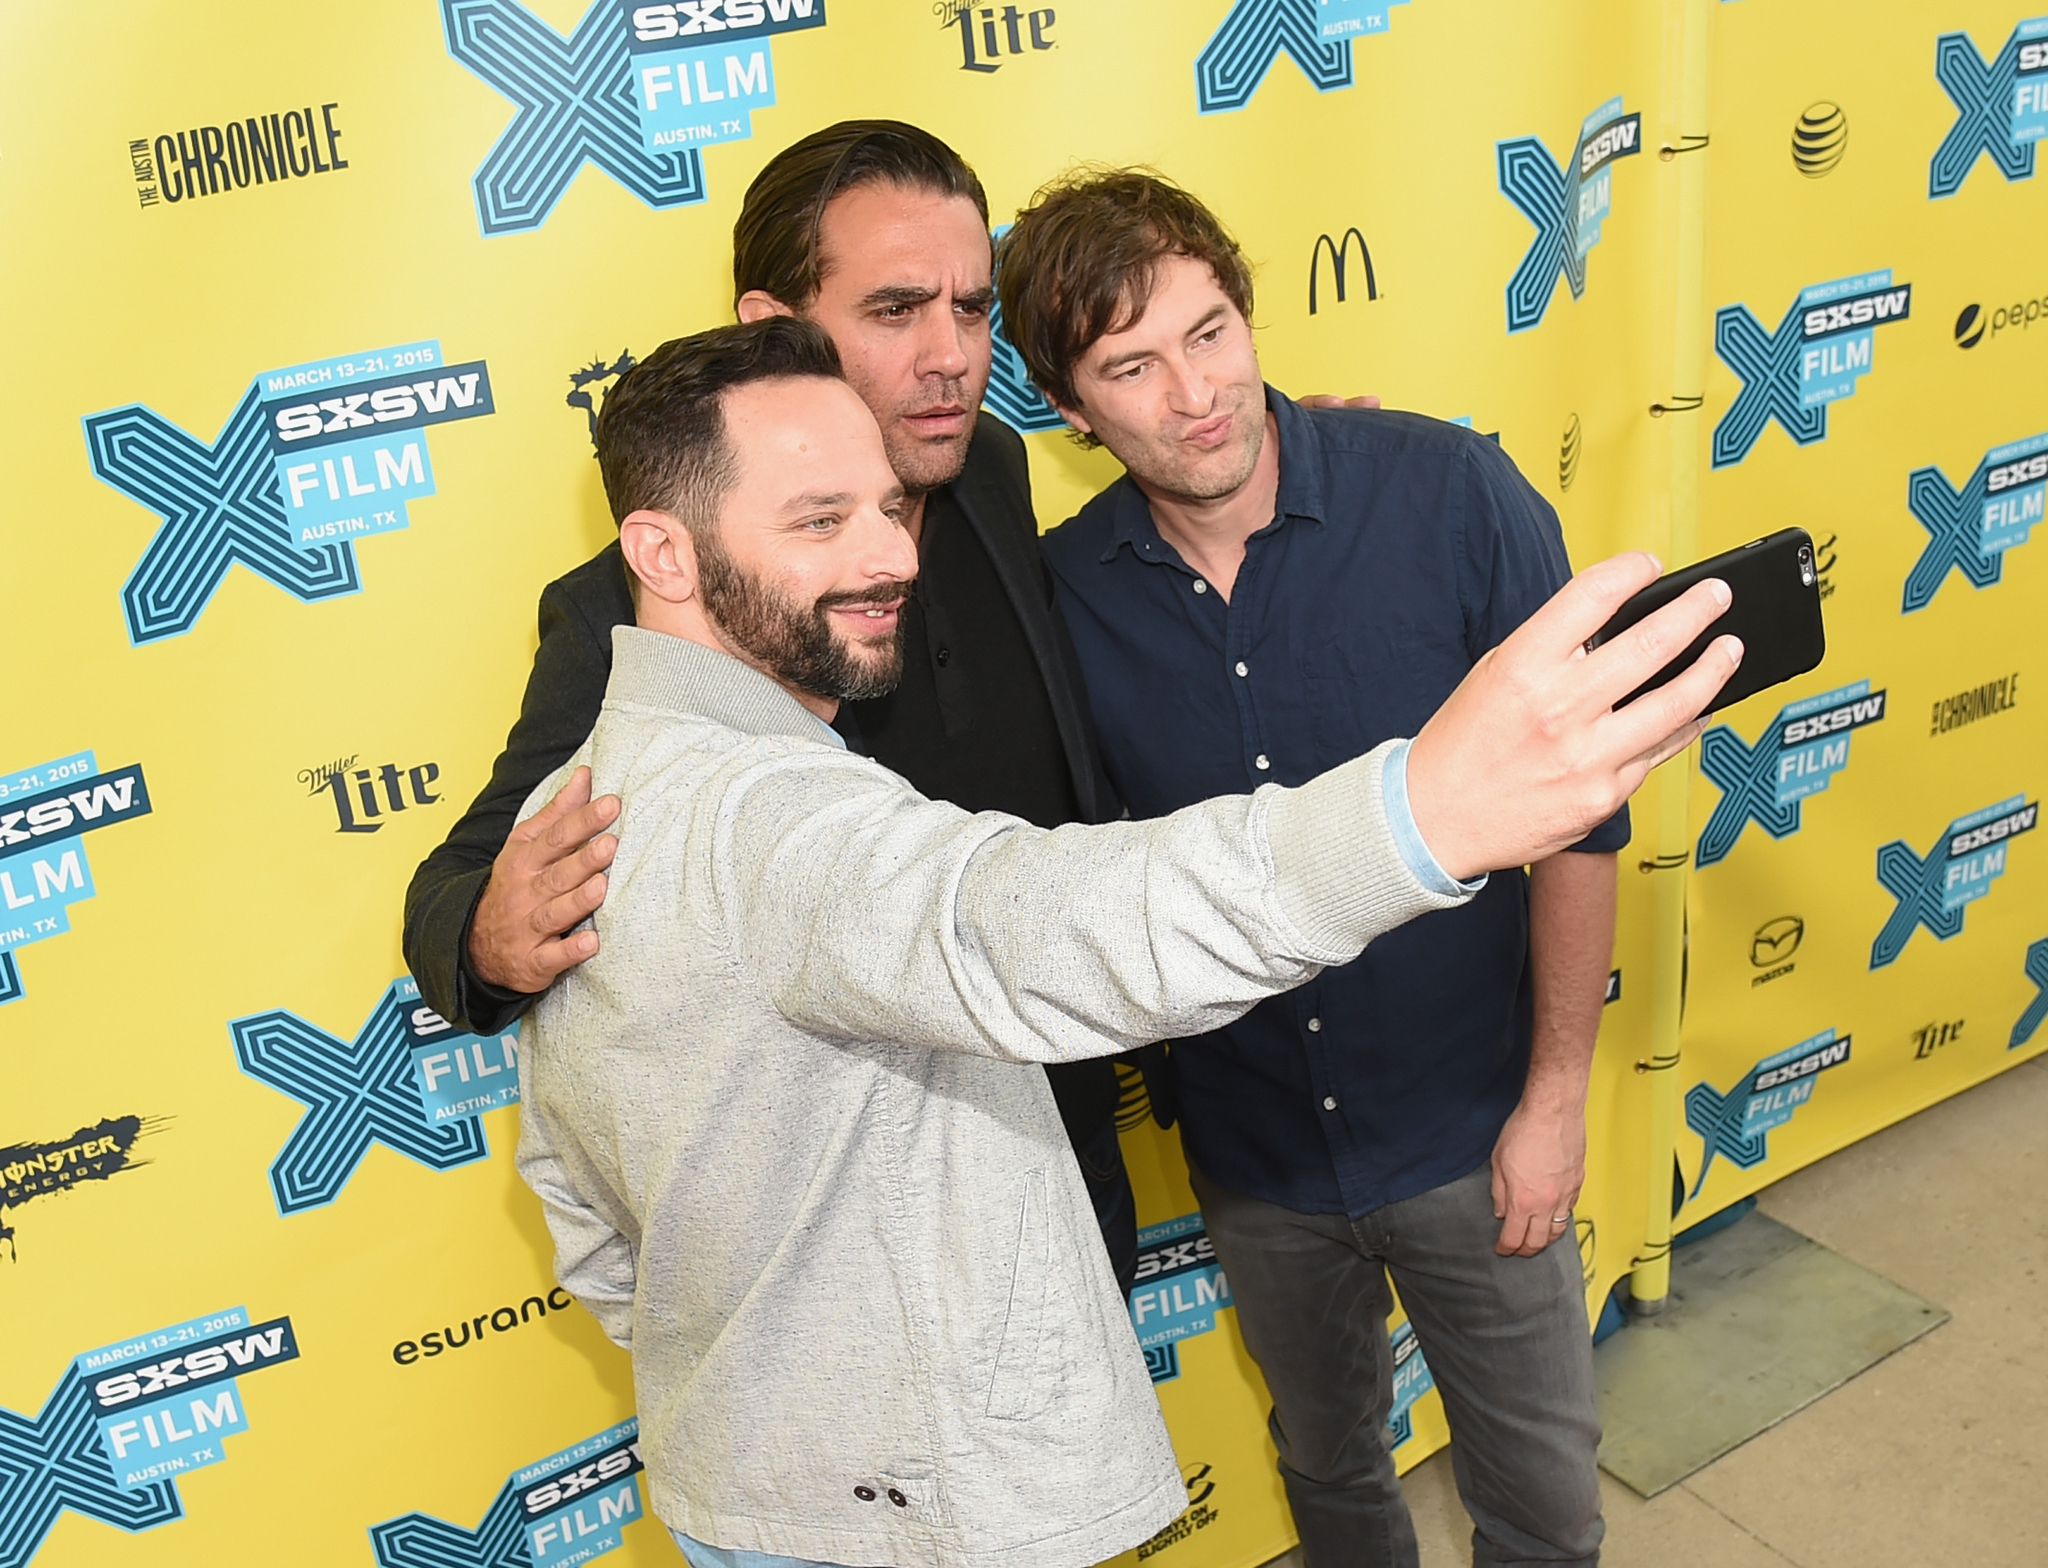 Bobby Cannavale, Mark Duplass and Nick Kroll at event of Adult Beginners (2014)